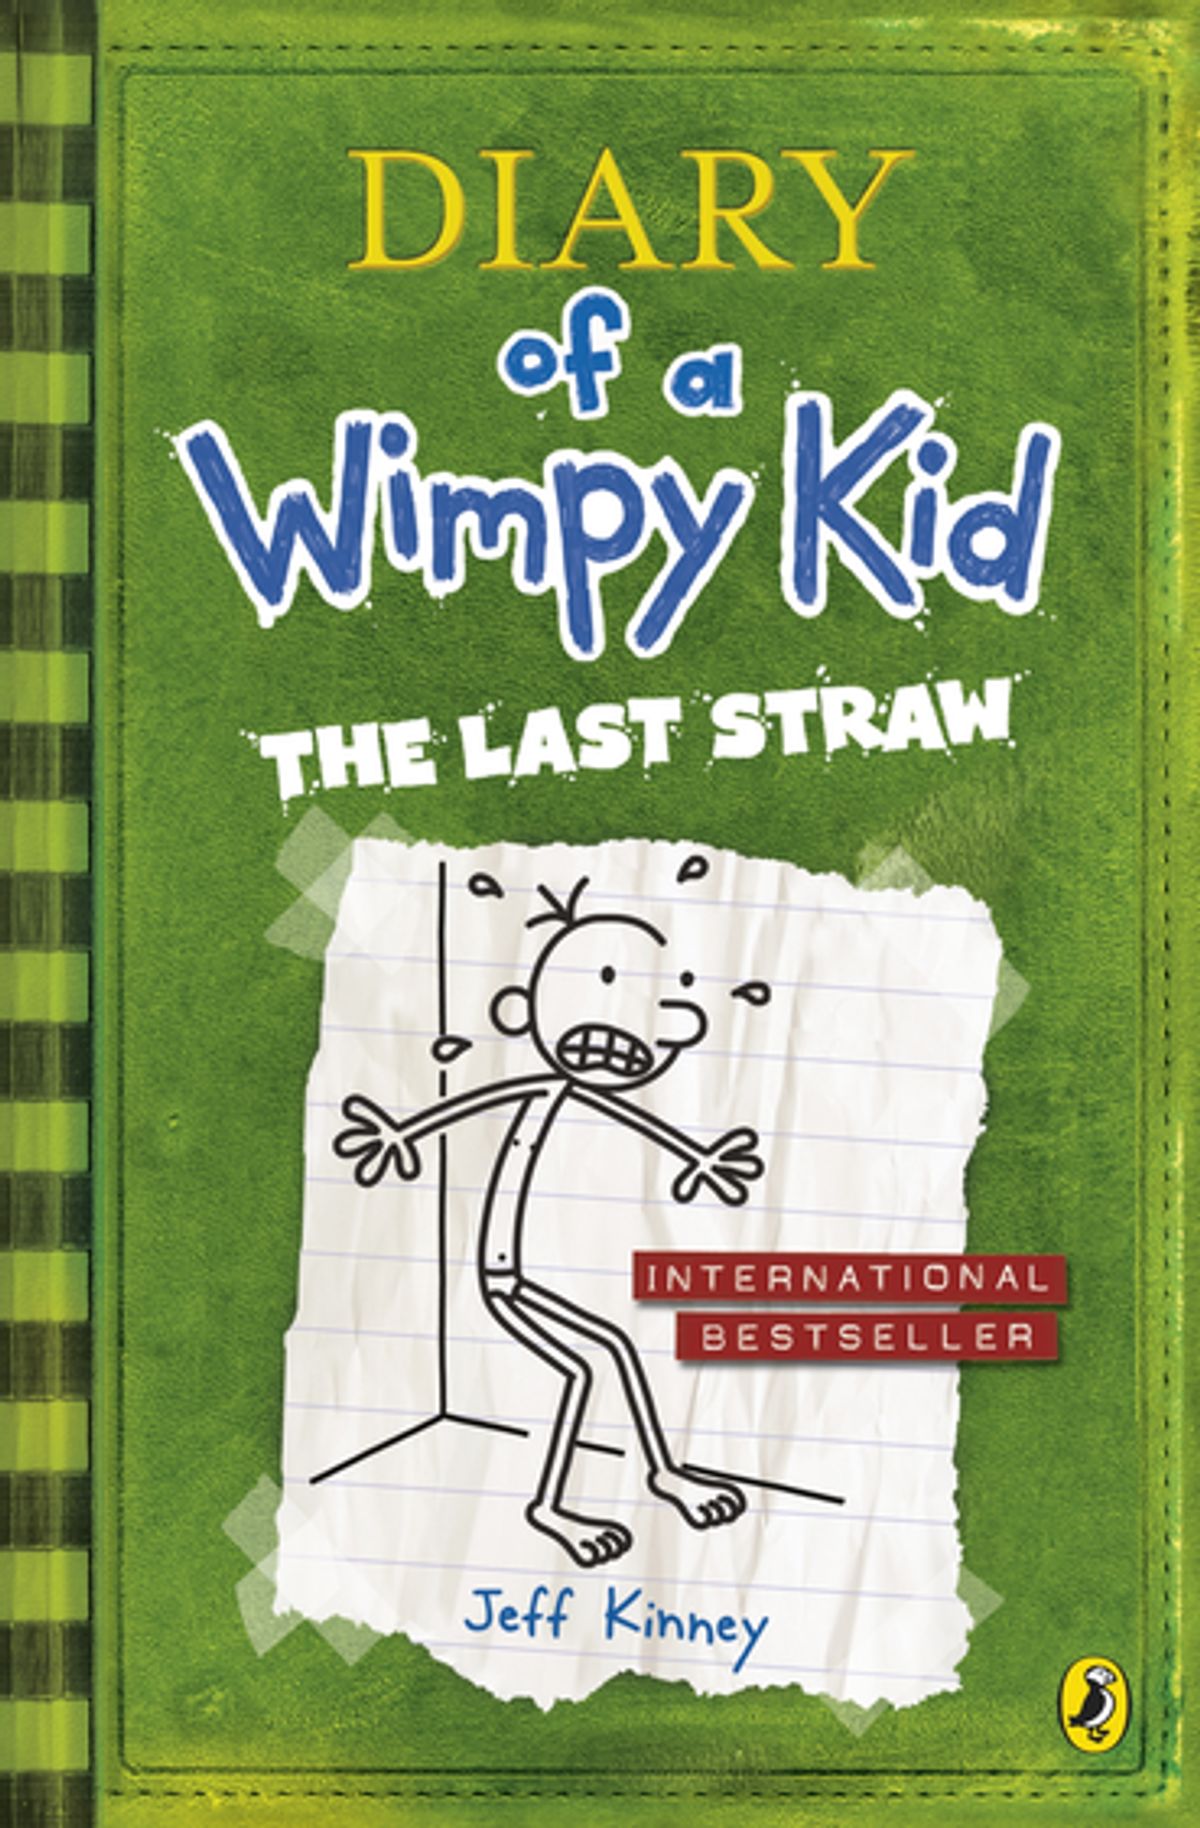 Diary Of A Wimpy Kid Book Free - gardentree